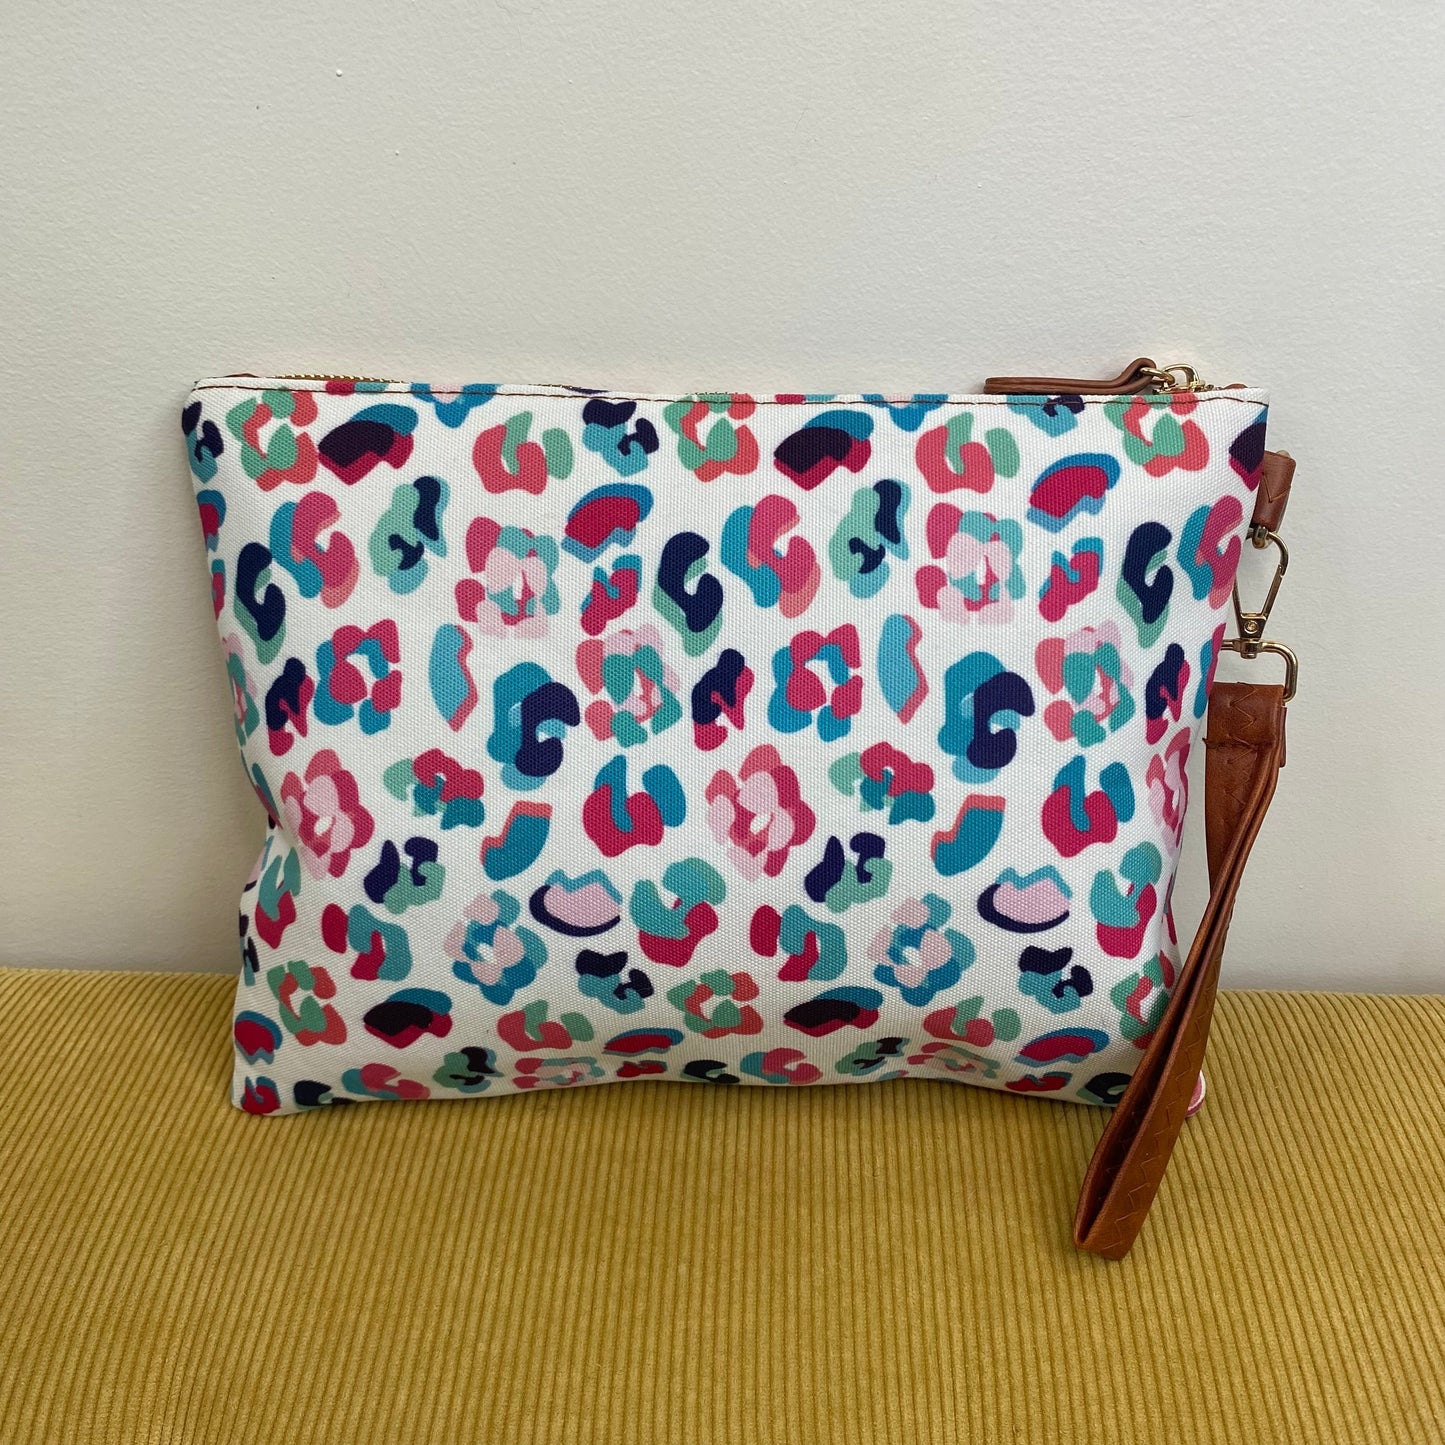 Clutch - Oversized Canvas & Faux Leather with Wrist Loop - Rainbow Leopard